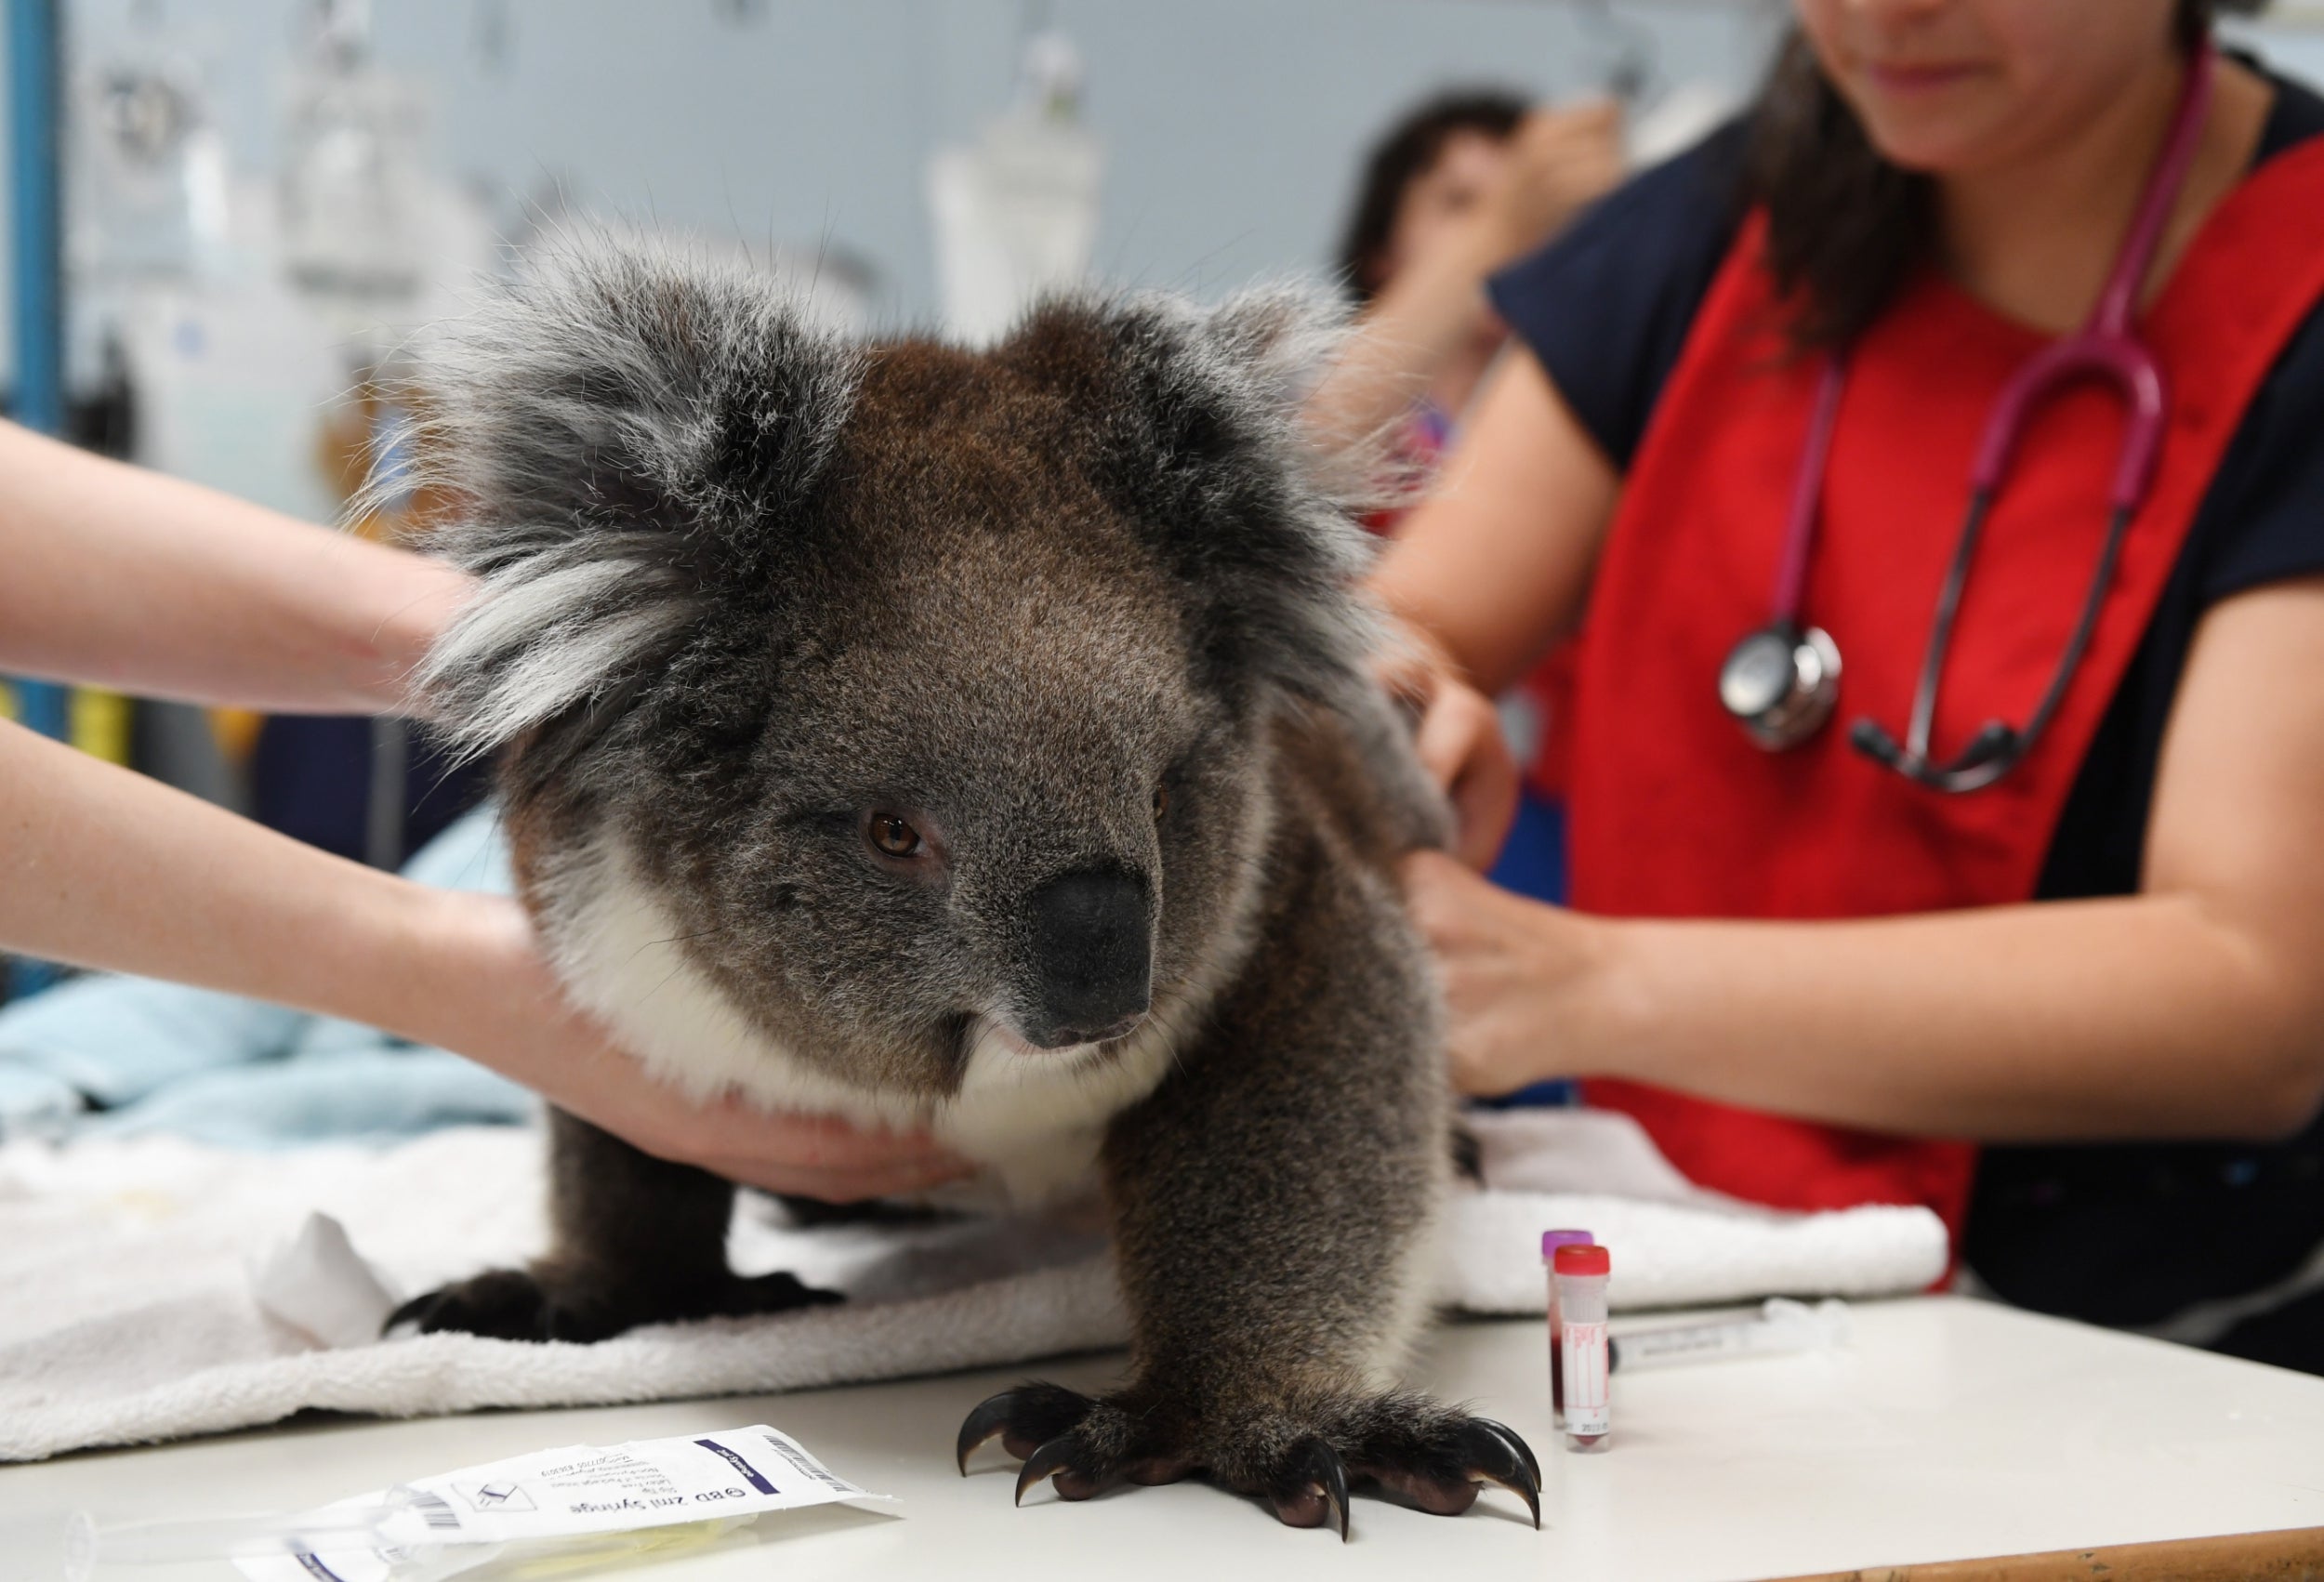 Koalas, like humans, can be infected with several strains of chlamydia and suffered from similar reproductive outcomes